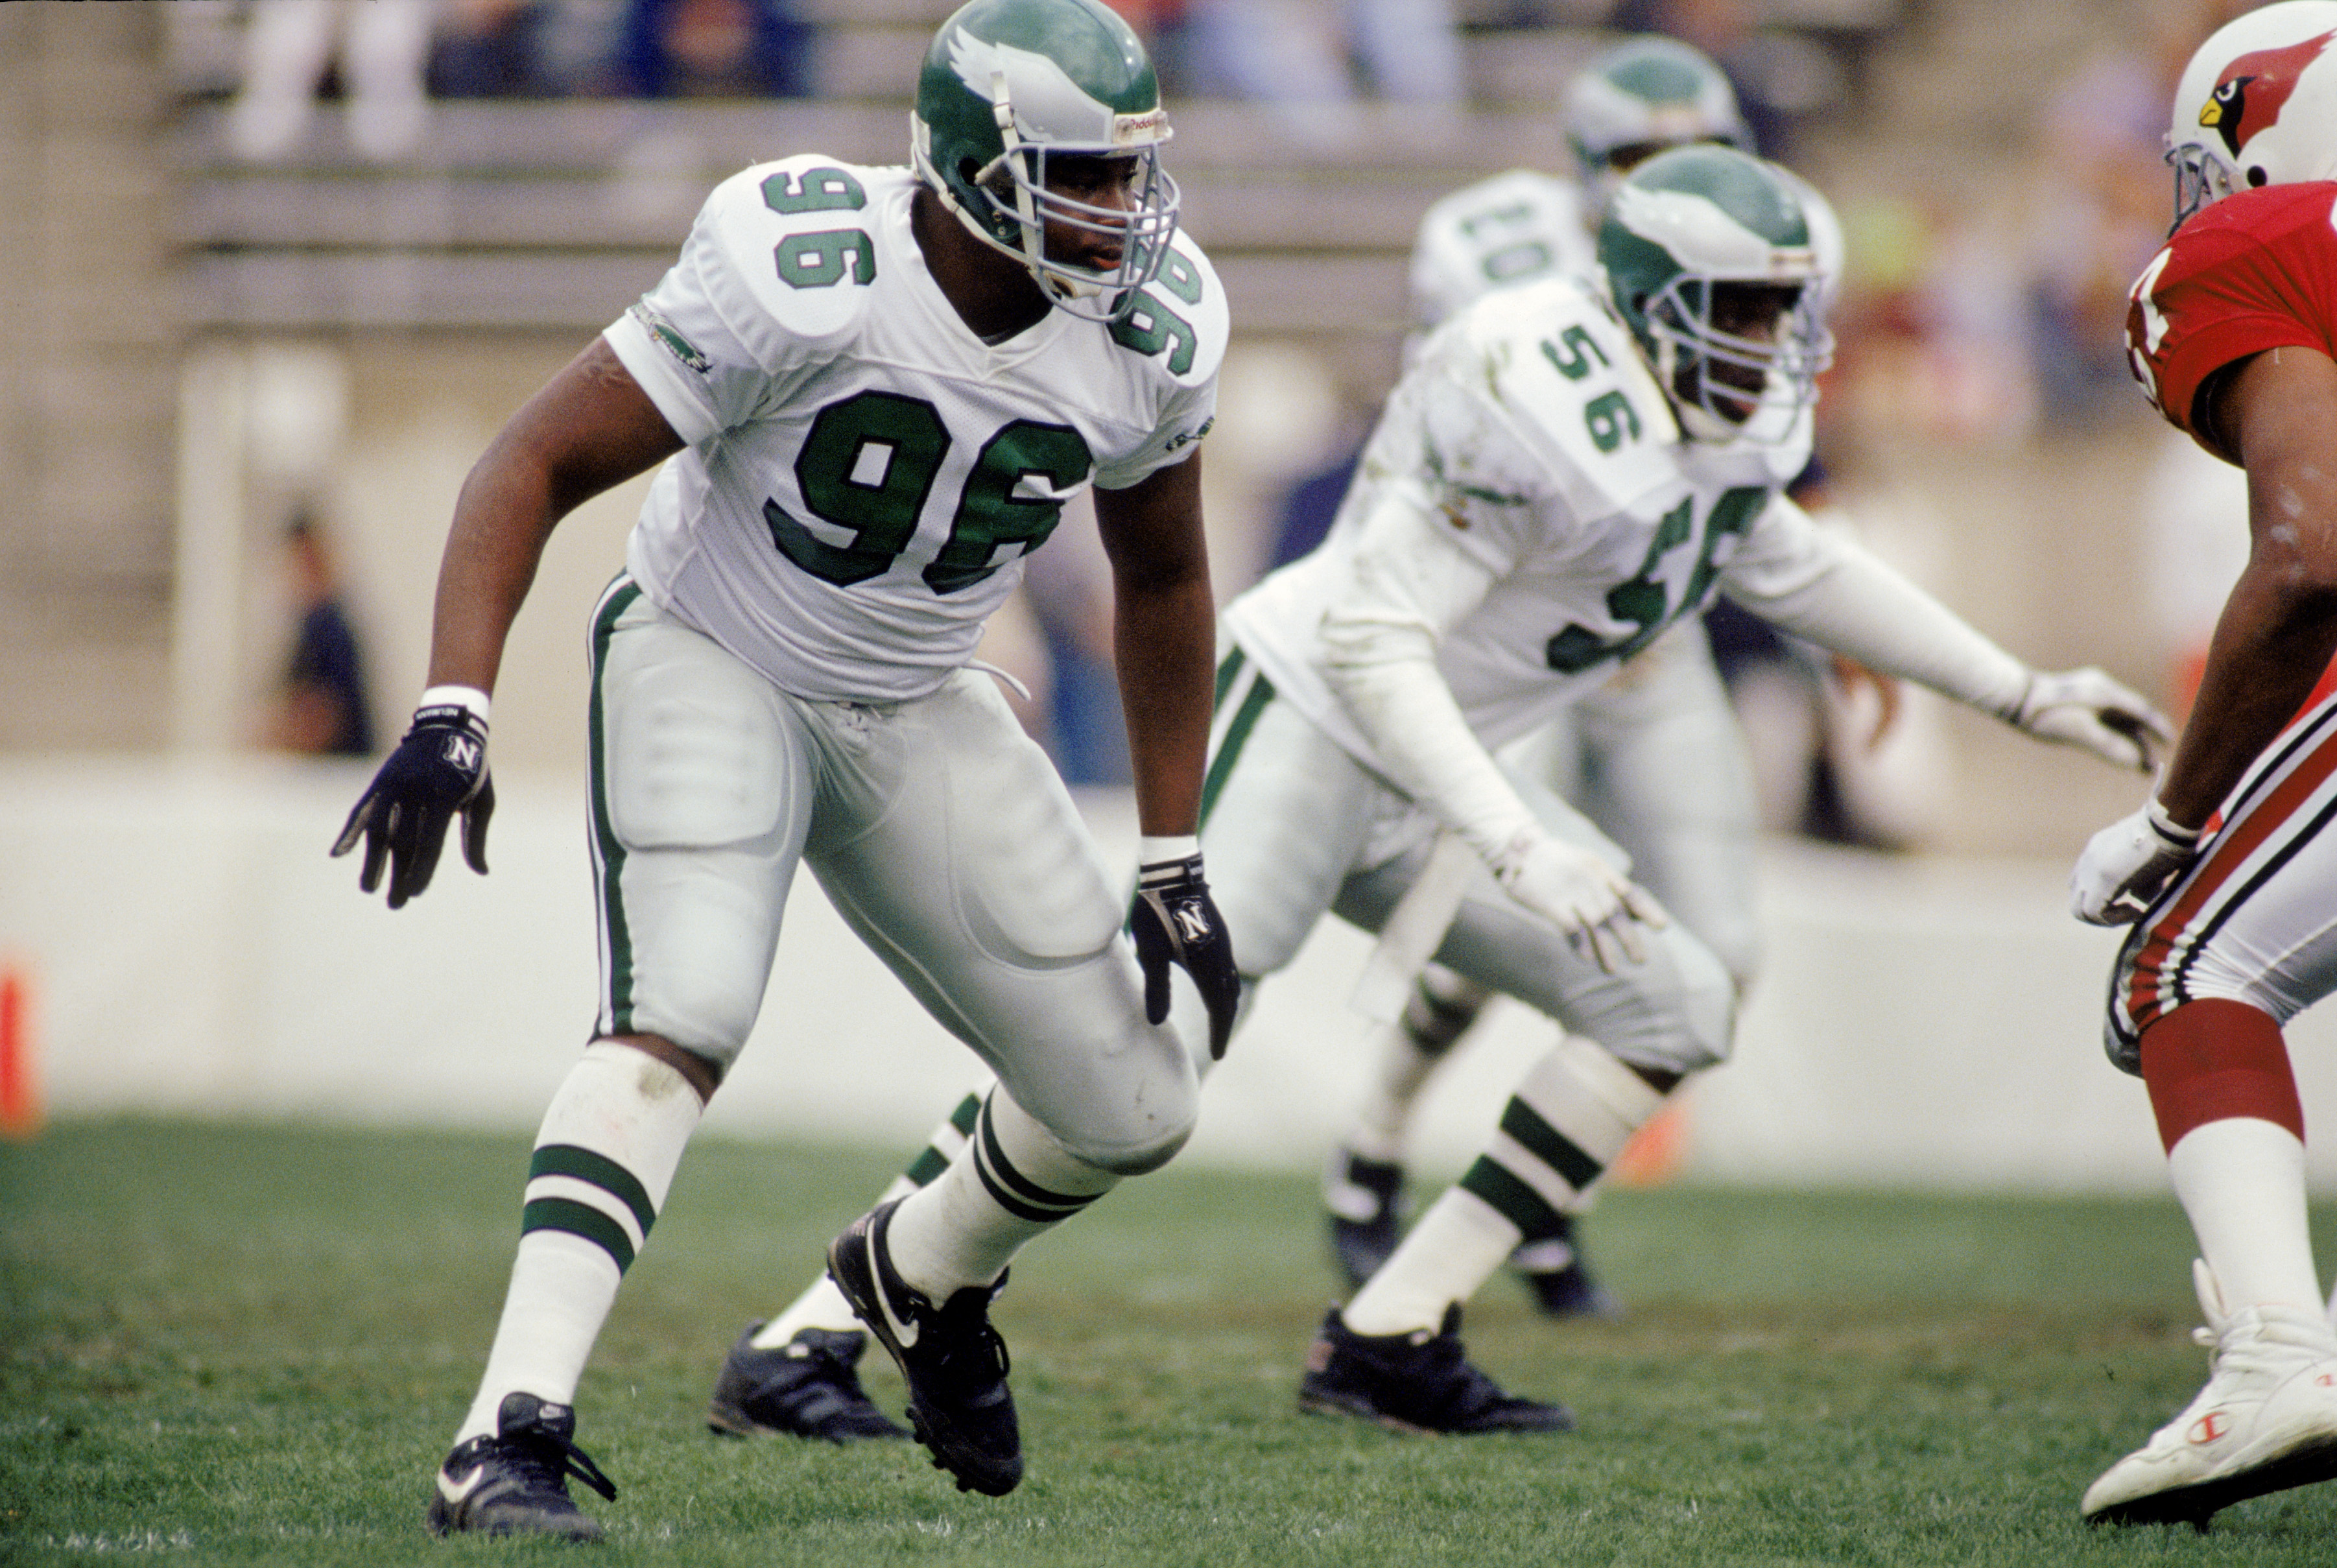 TEMPE, AZ - DECEMBER 22:  Defensive end Clyde Simmons #96 of the Philadelphia Eagles rushes the passer of the Arizona Cardinals in Sun Devil Stadium on December 22, 1990 in Tempe, Arizona.  The Eagels won 23-21.  (Photo by Stephen Dunn/Getty Images)